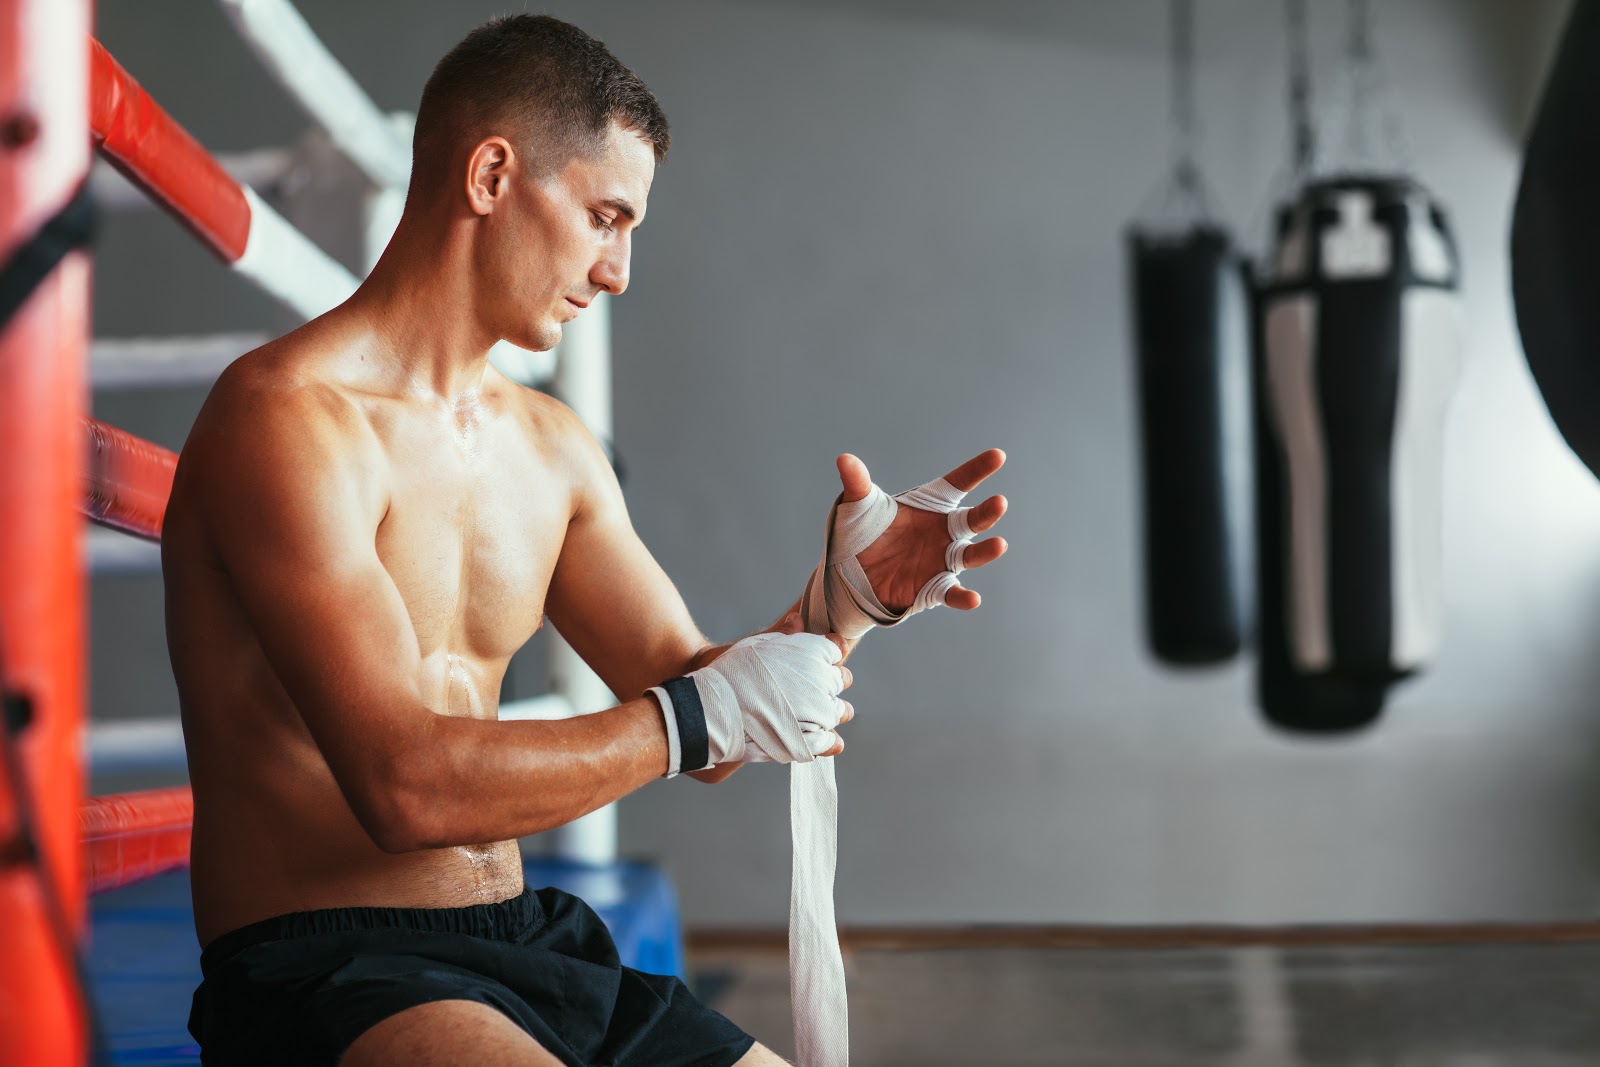 Shirtless man wrapping his hands sitting on the edge of the boxing ring a boxing gym.